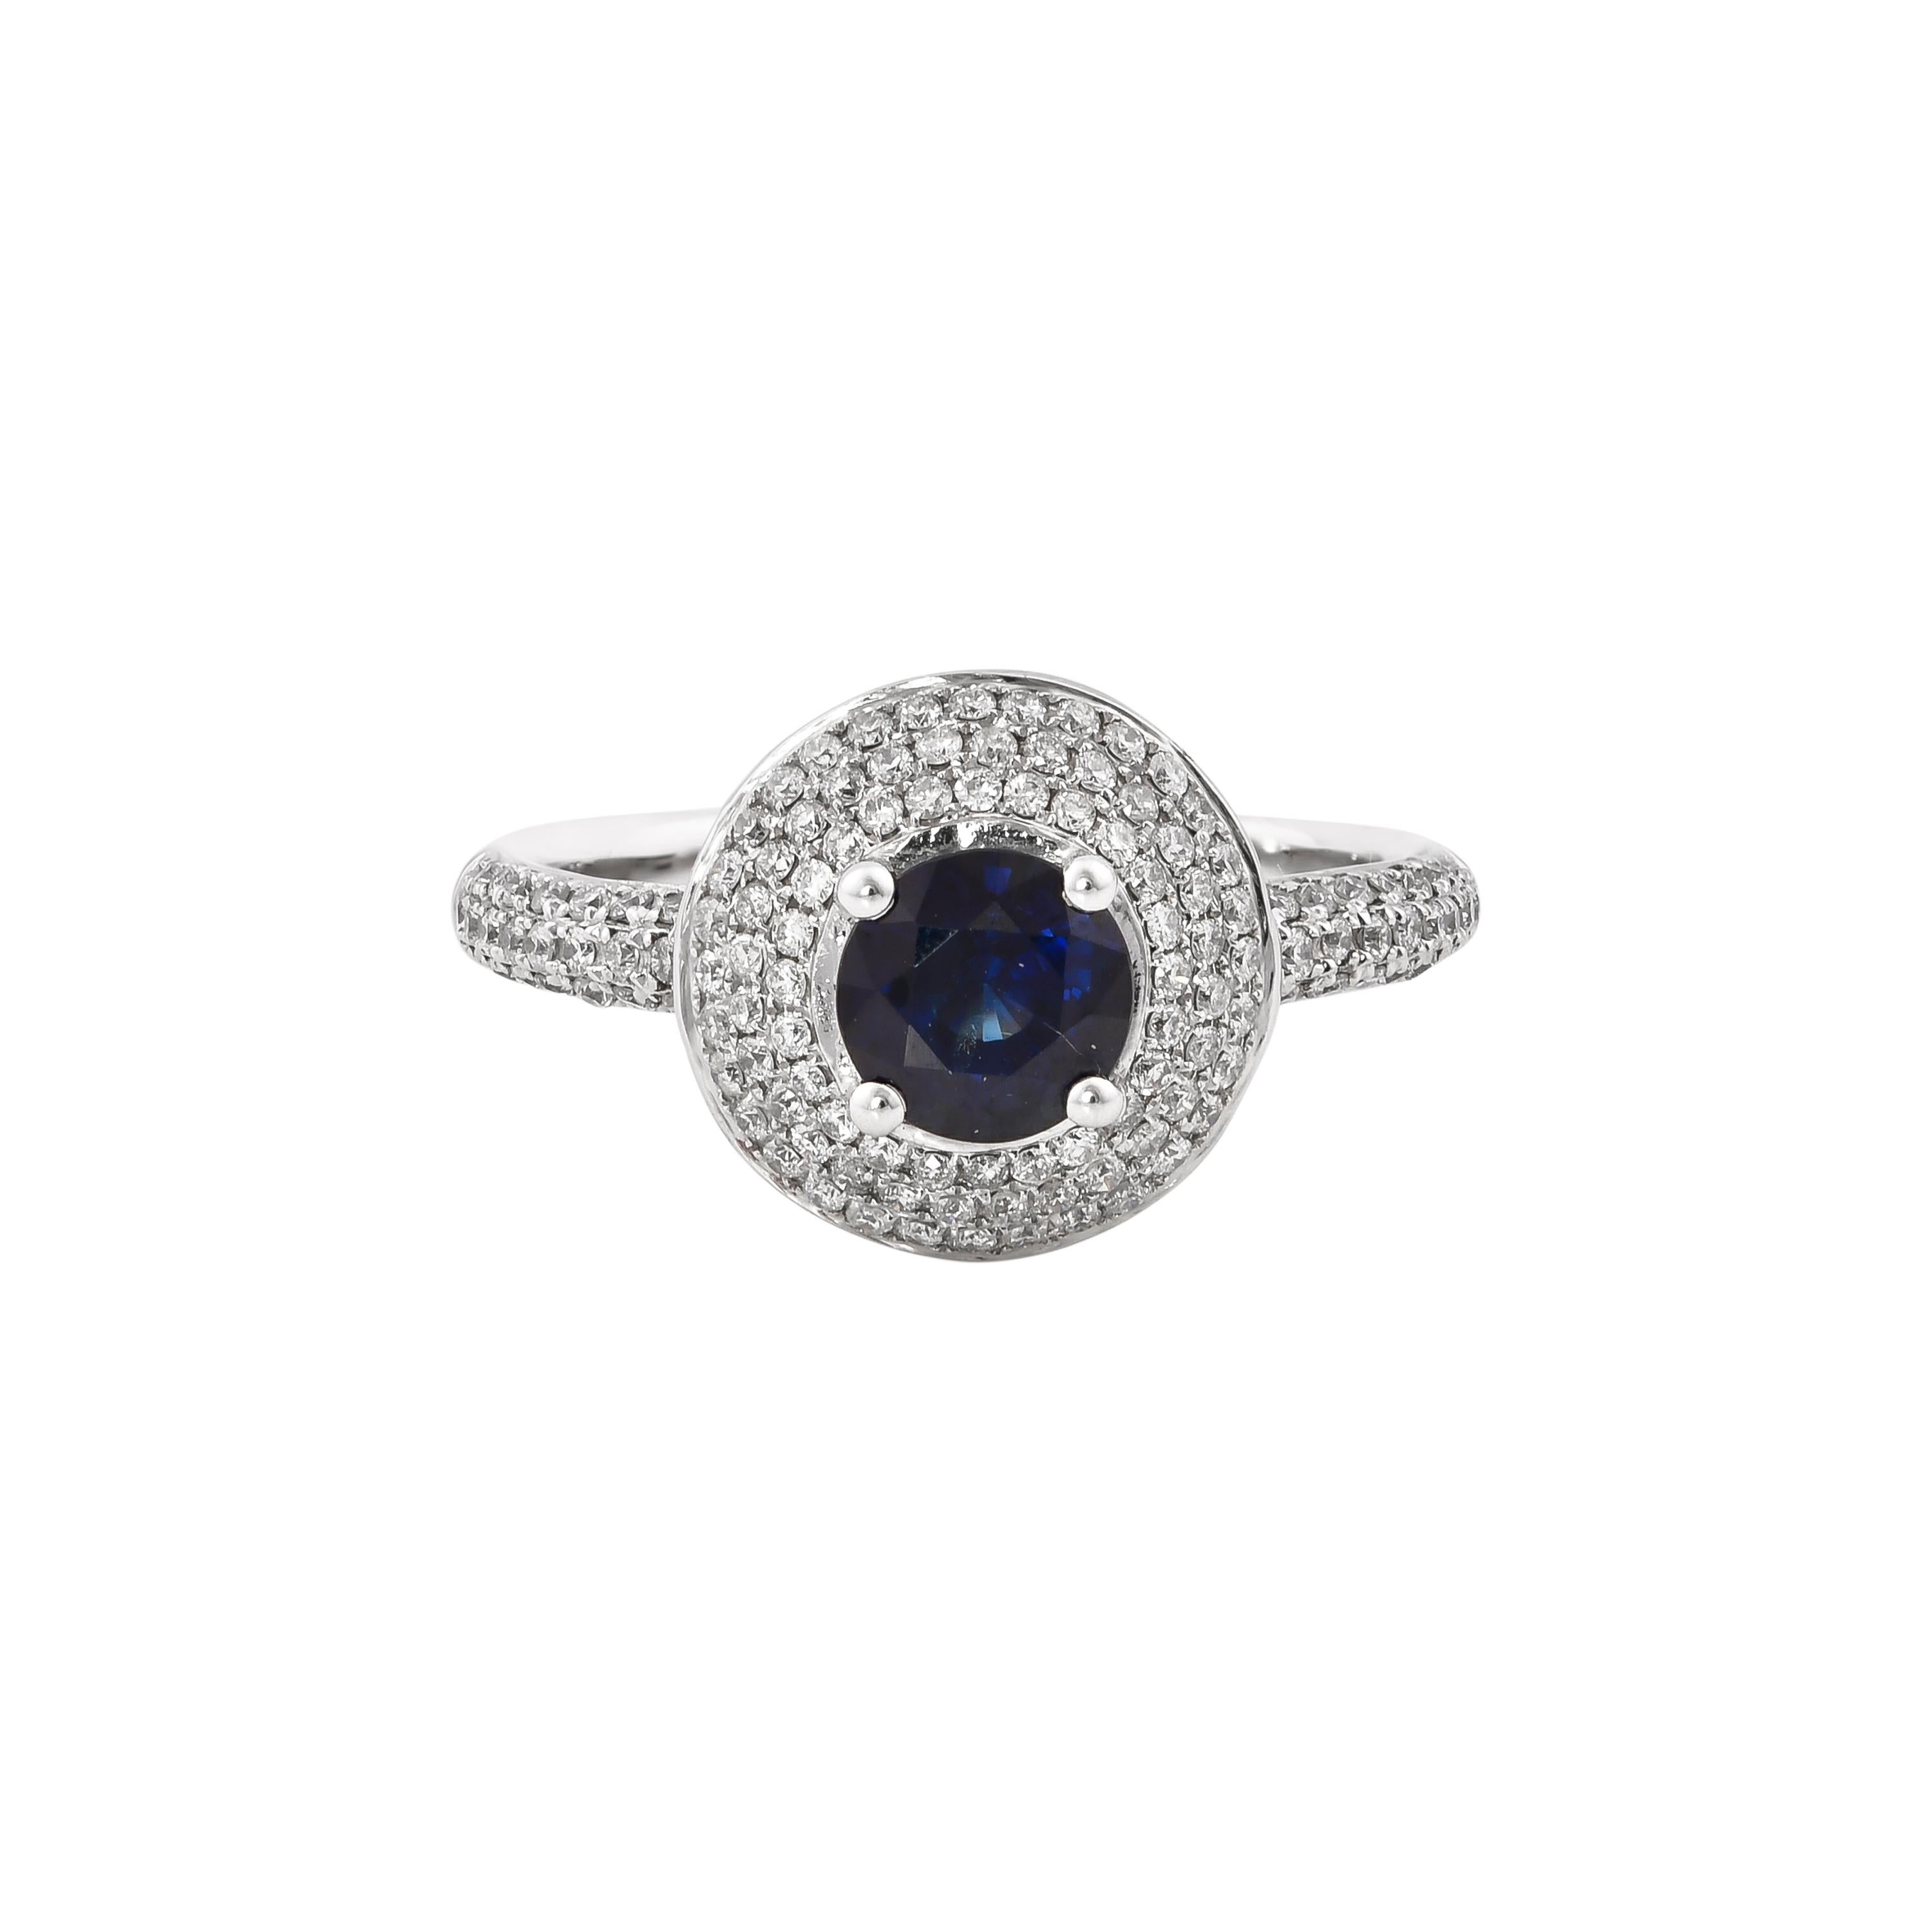 Round Cut 1.0 Carat Blue Sapphire and White Diamond Ring in 14 Karat White Gold For Sale